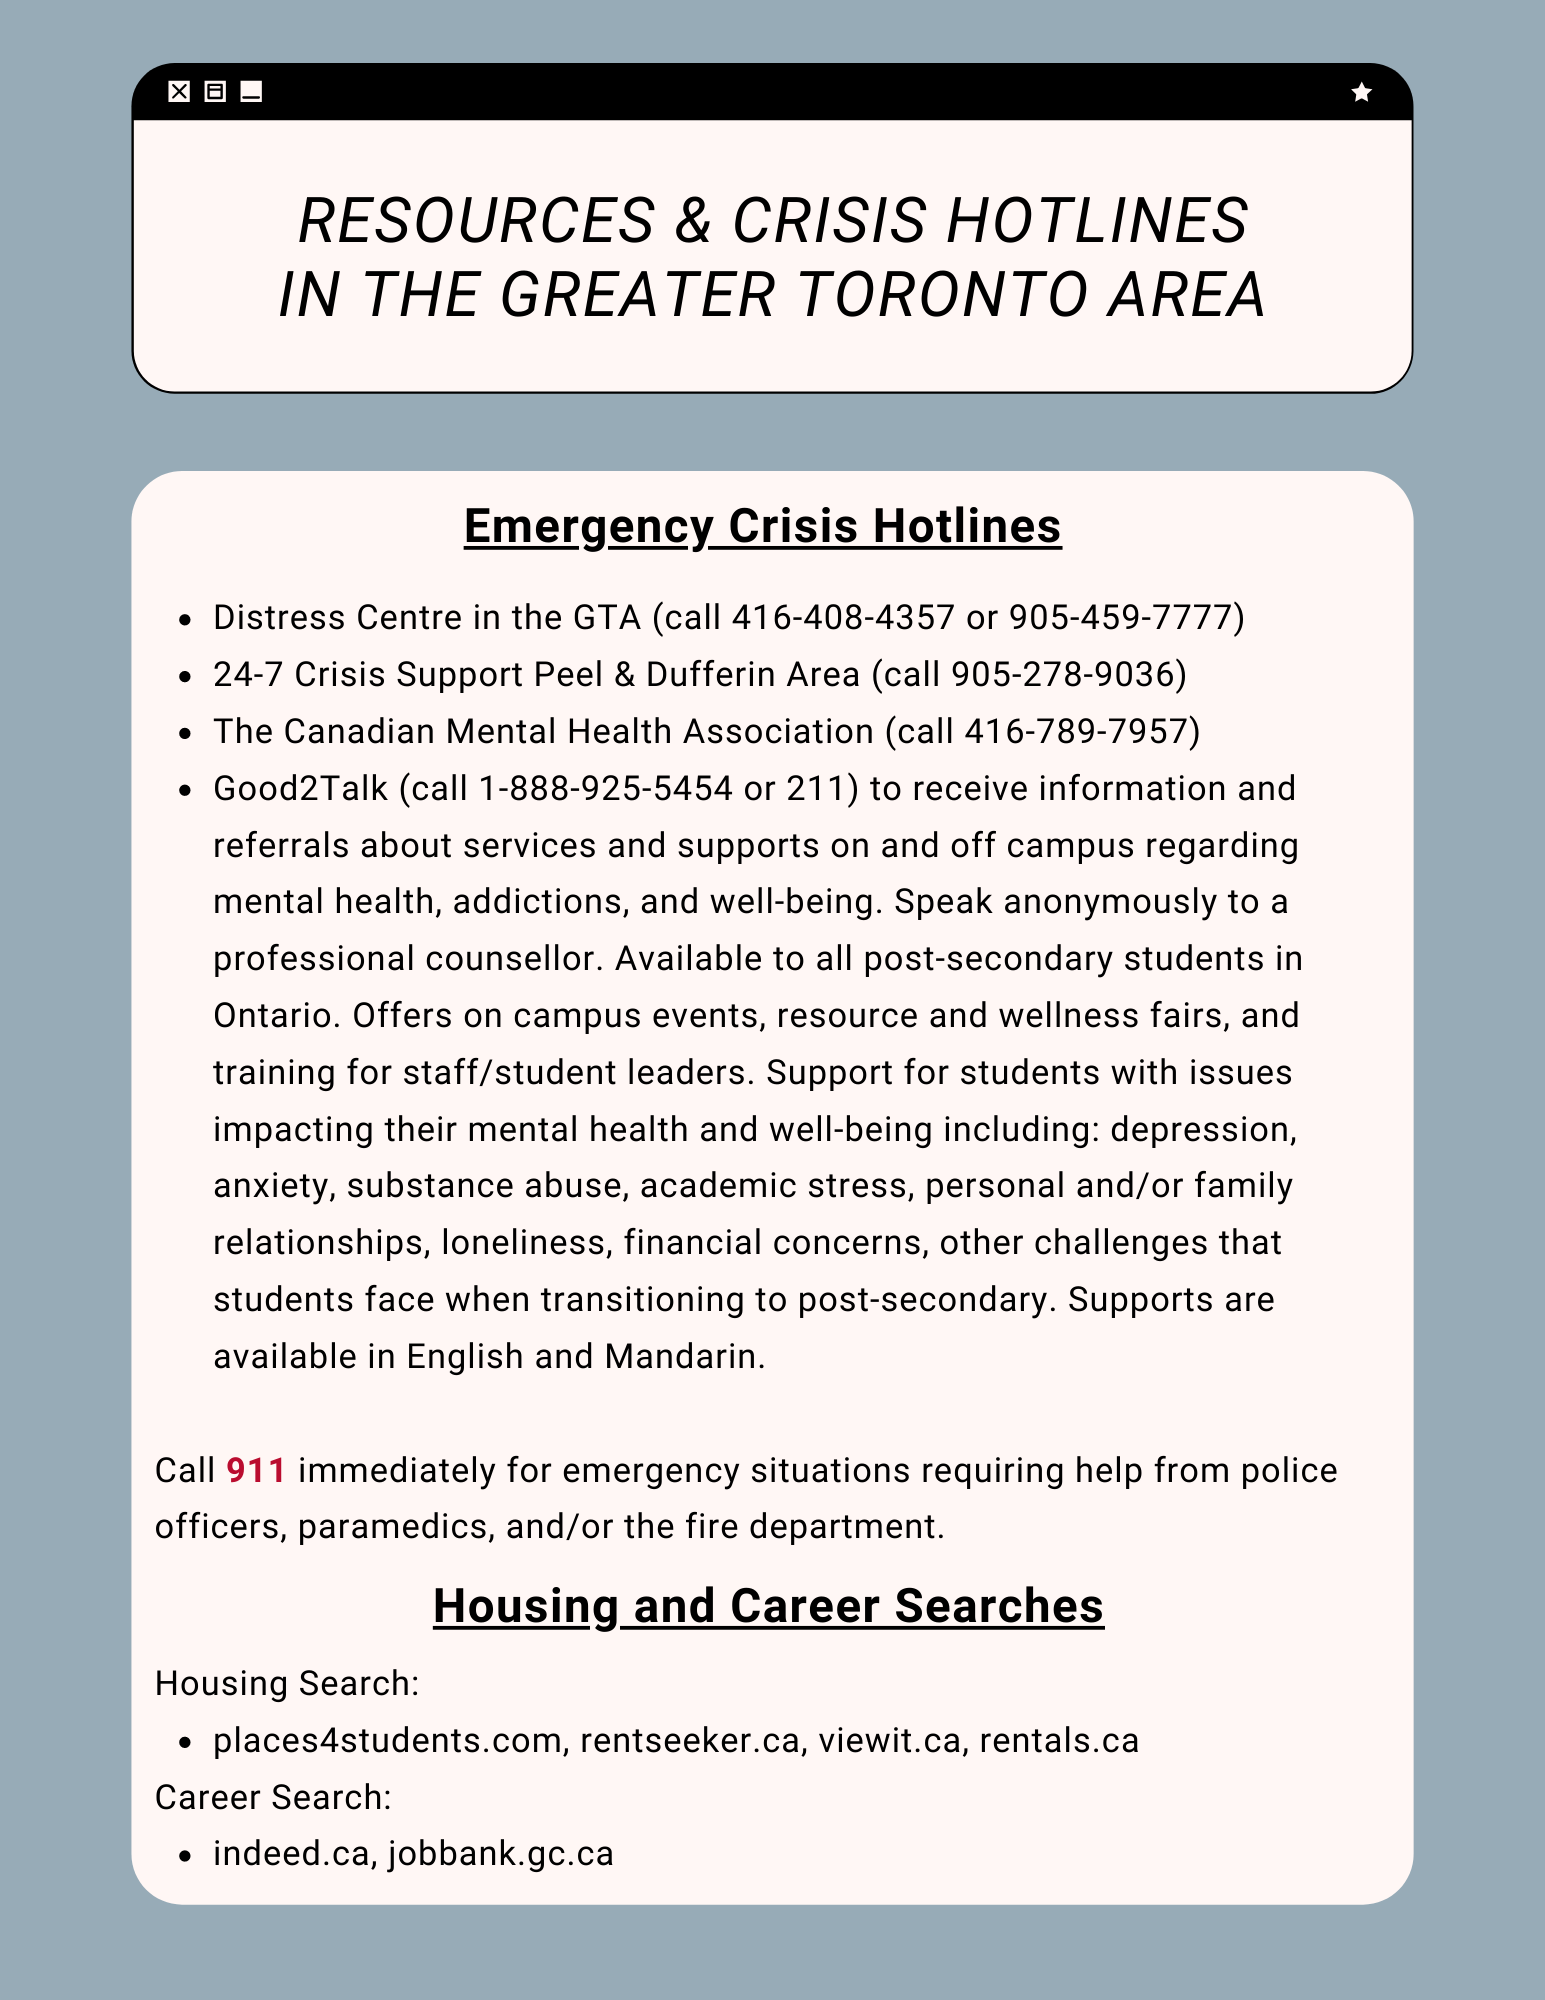 Resources and Crisis Hotlines in the GTA